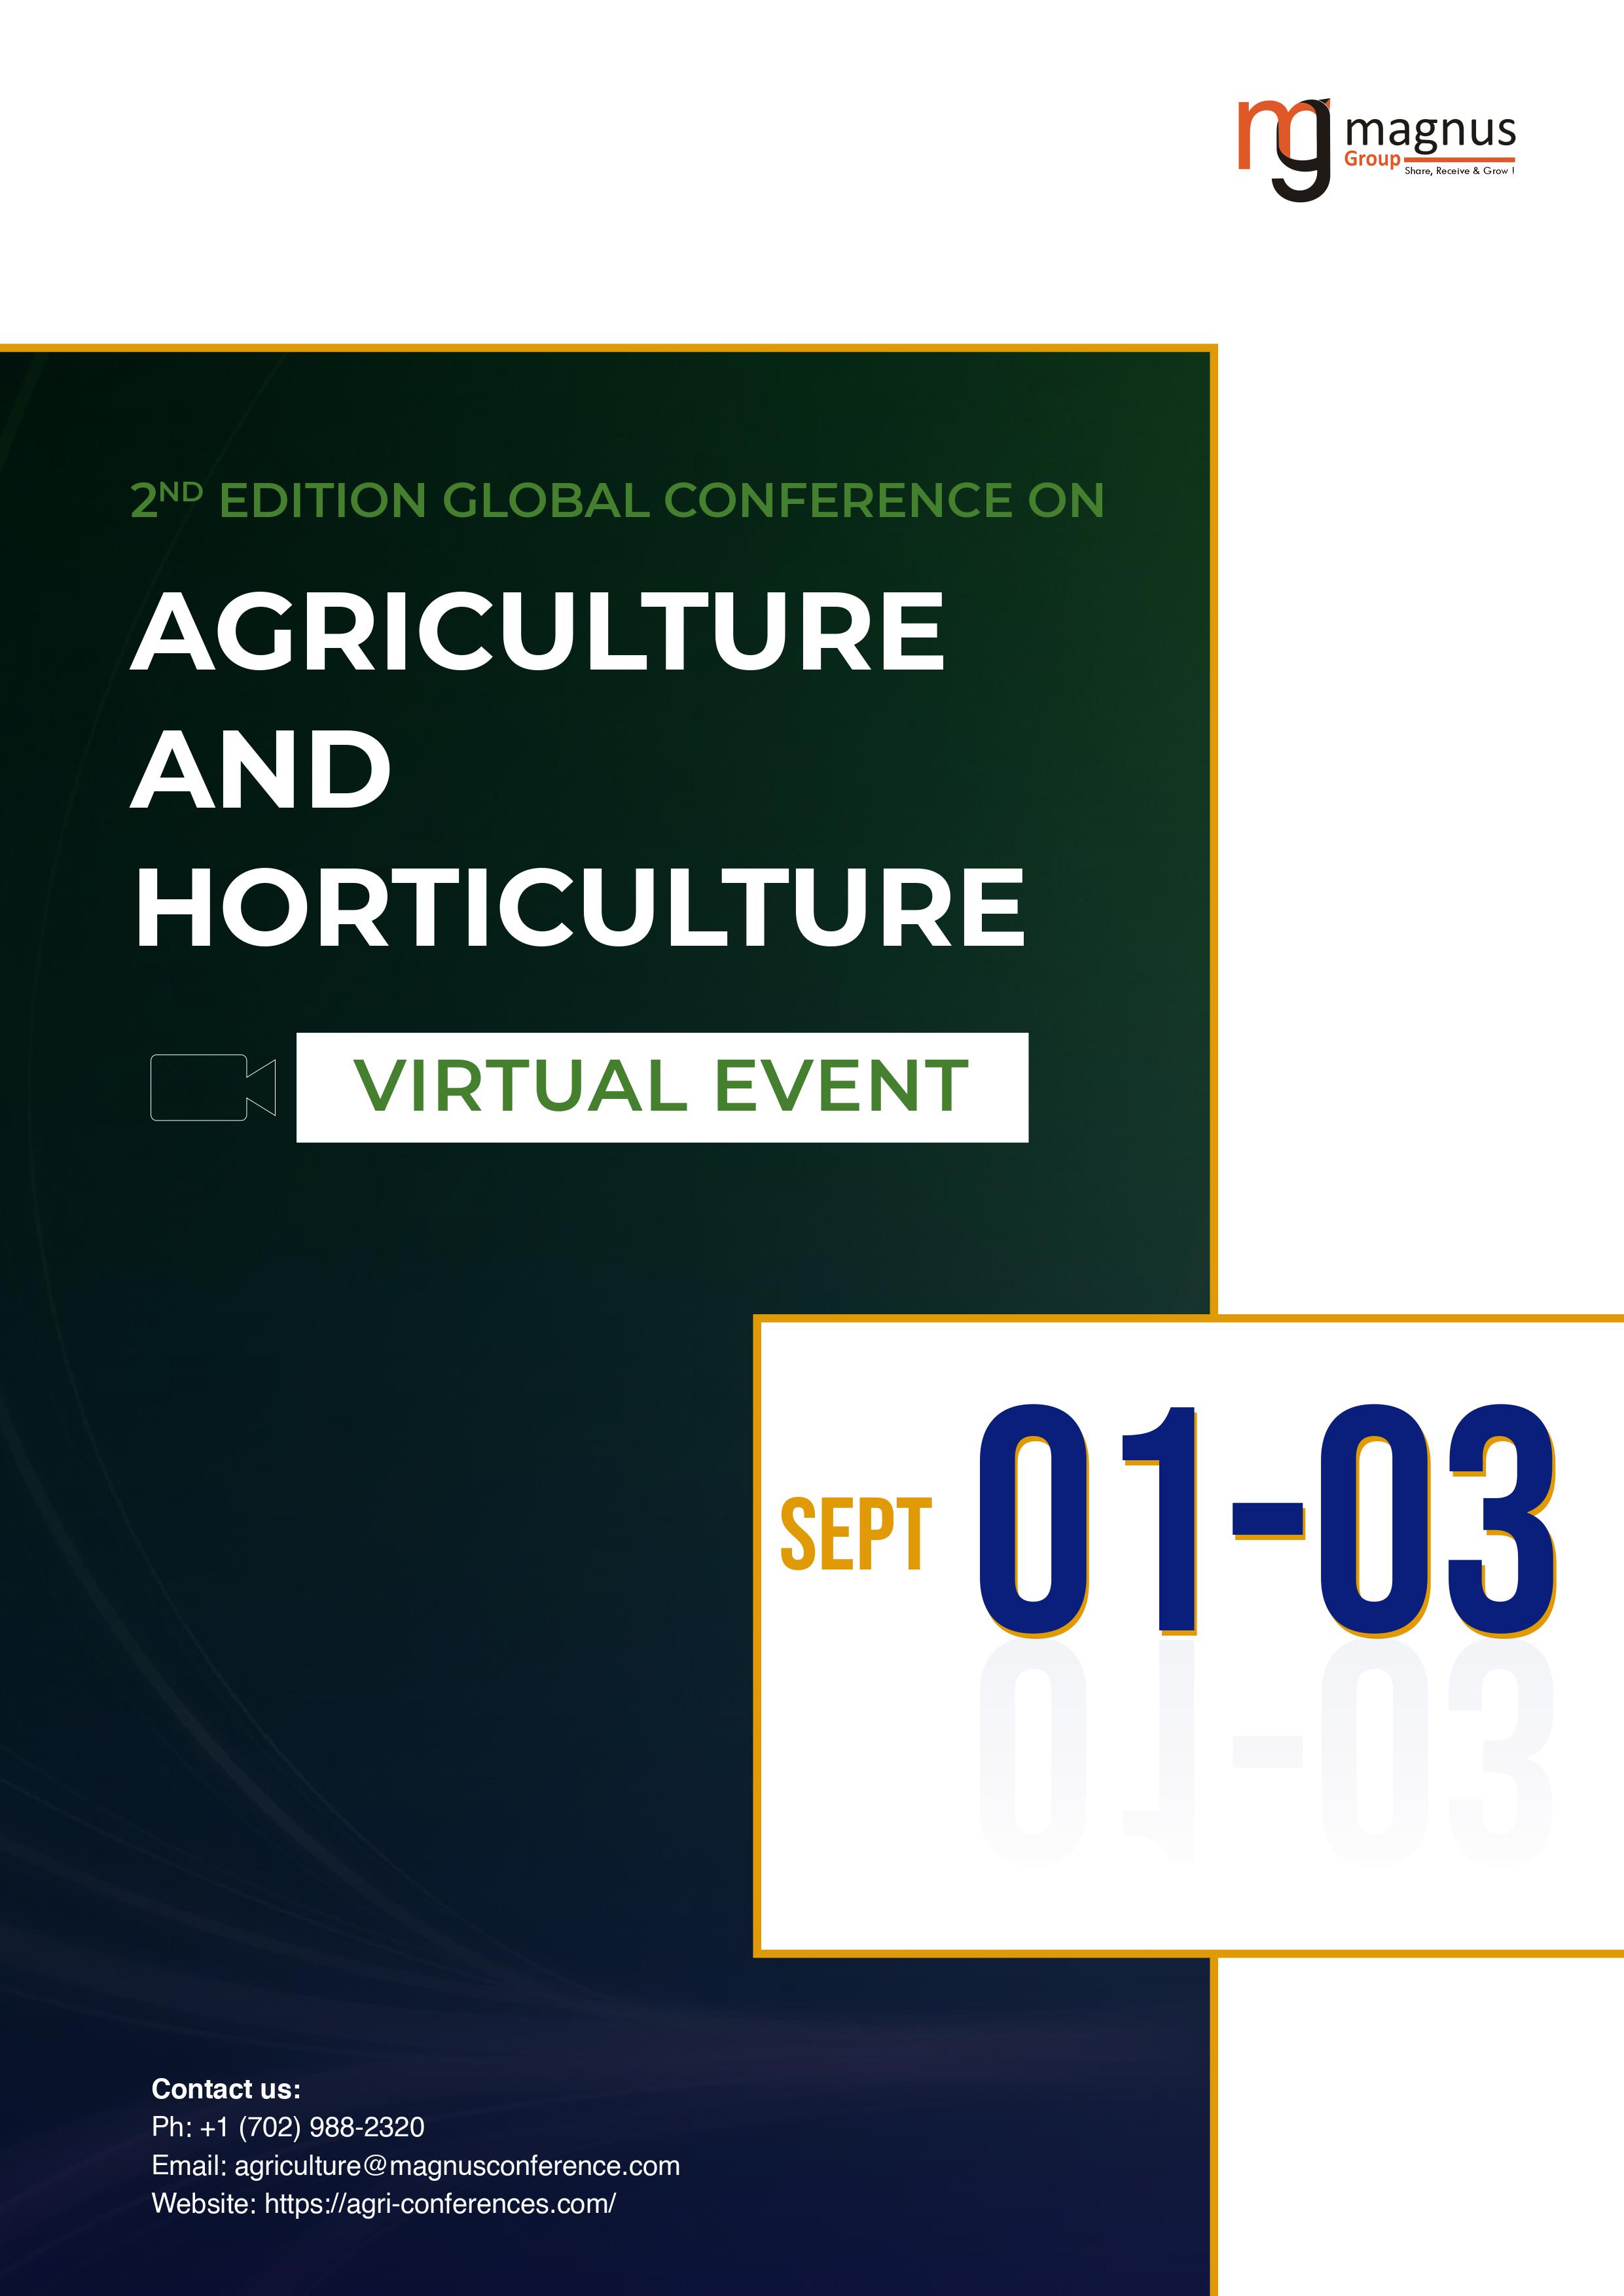 2nd Edition of Global Conference on Agriculture and Horticulture | Online Event Book